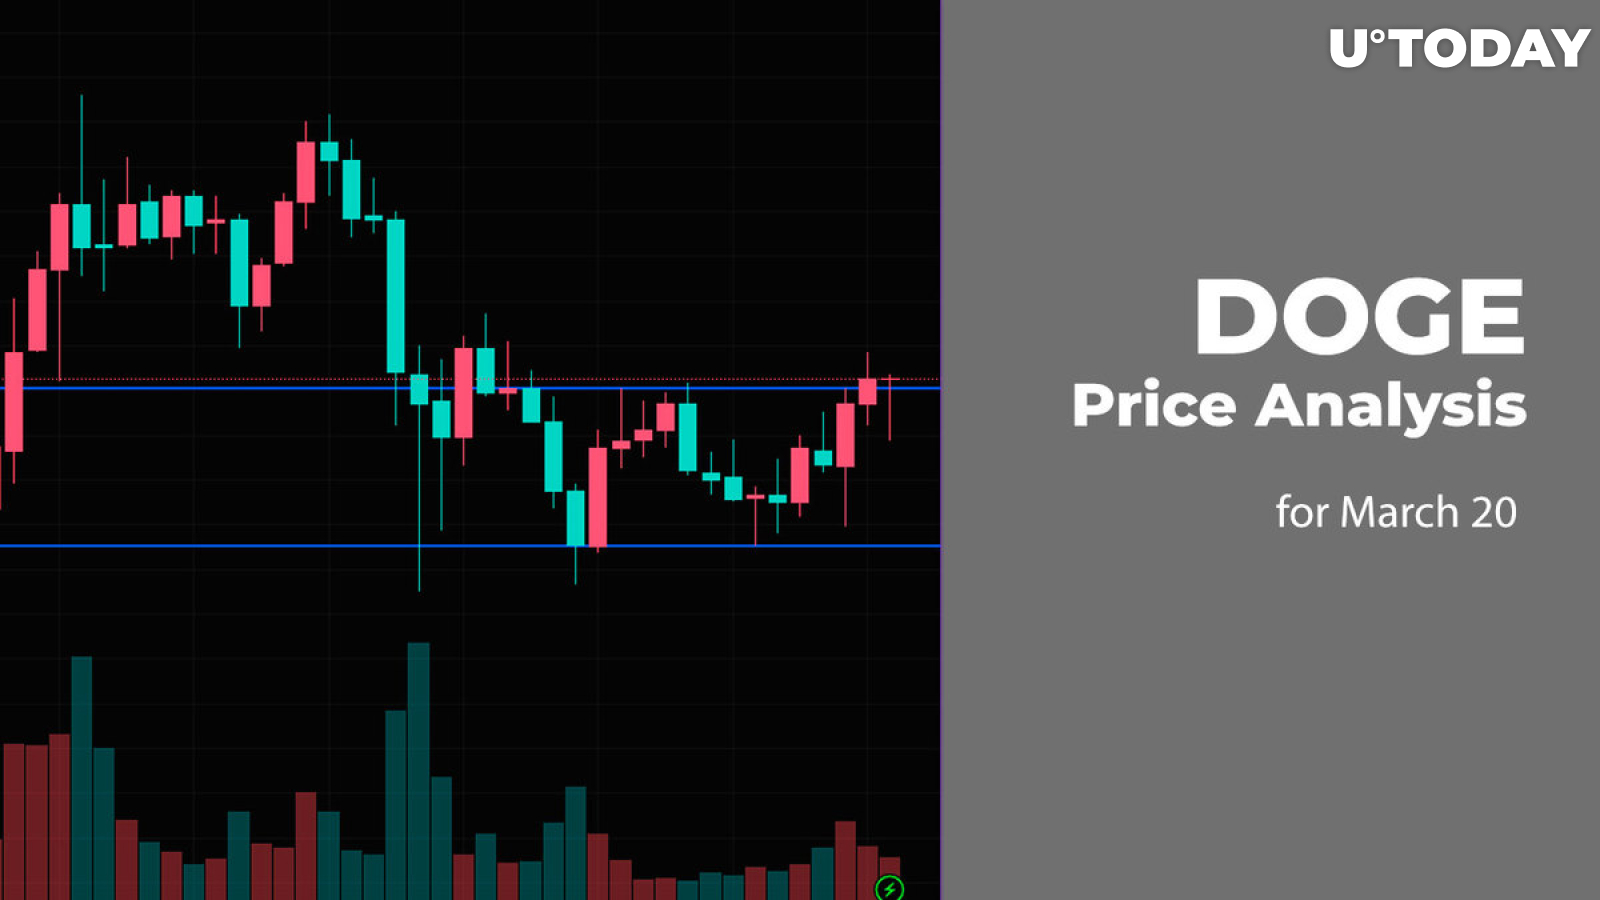 DOGE Price Analysis for March 20